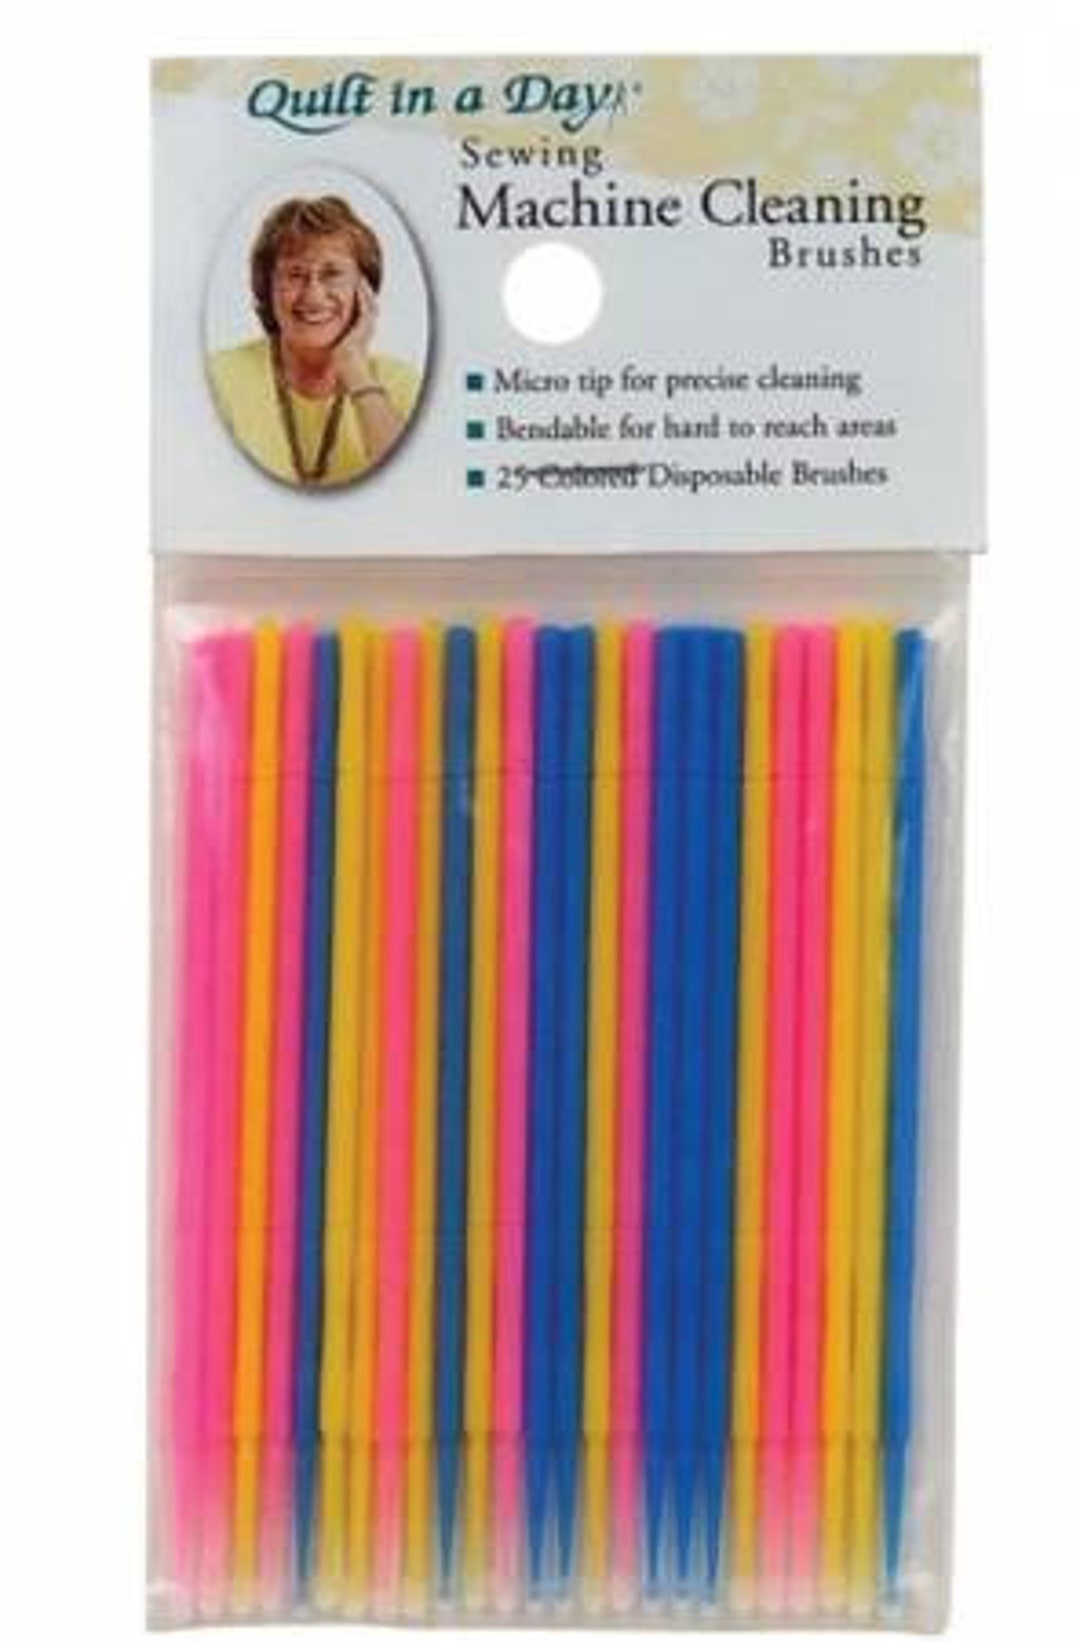 Sewing Machine Cleaning Brushes - 25 qty - 735272049654 Quilt in a Day /  Quilting Notions